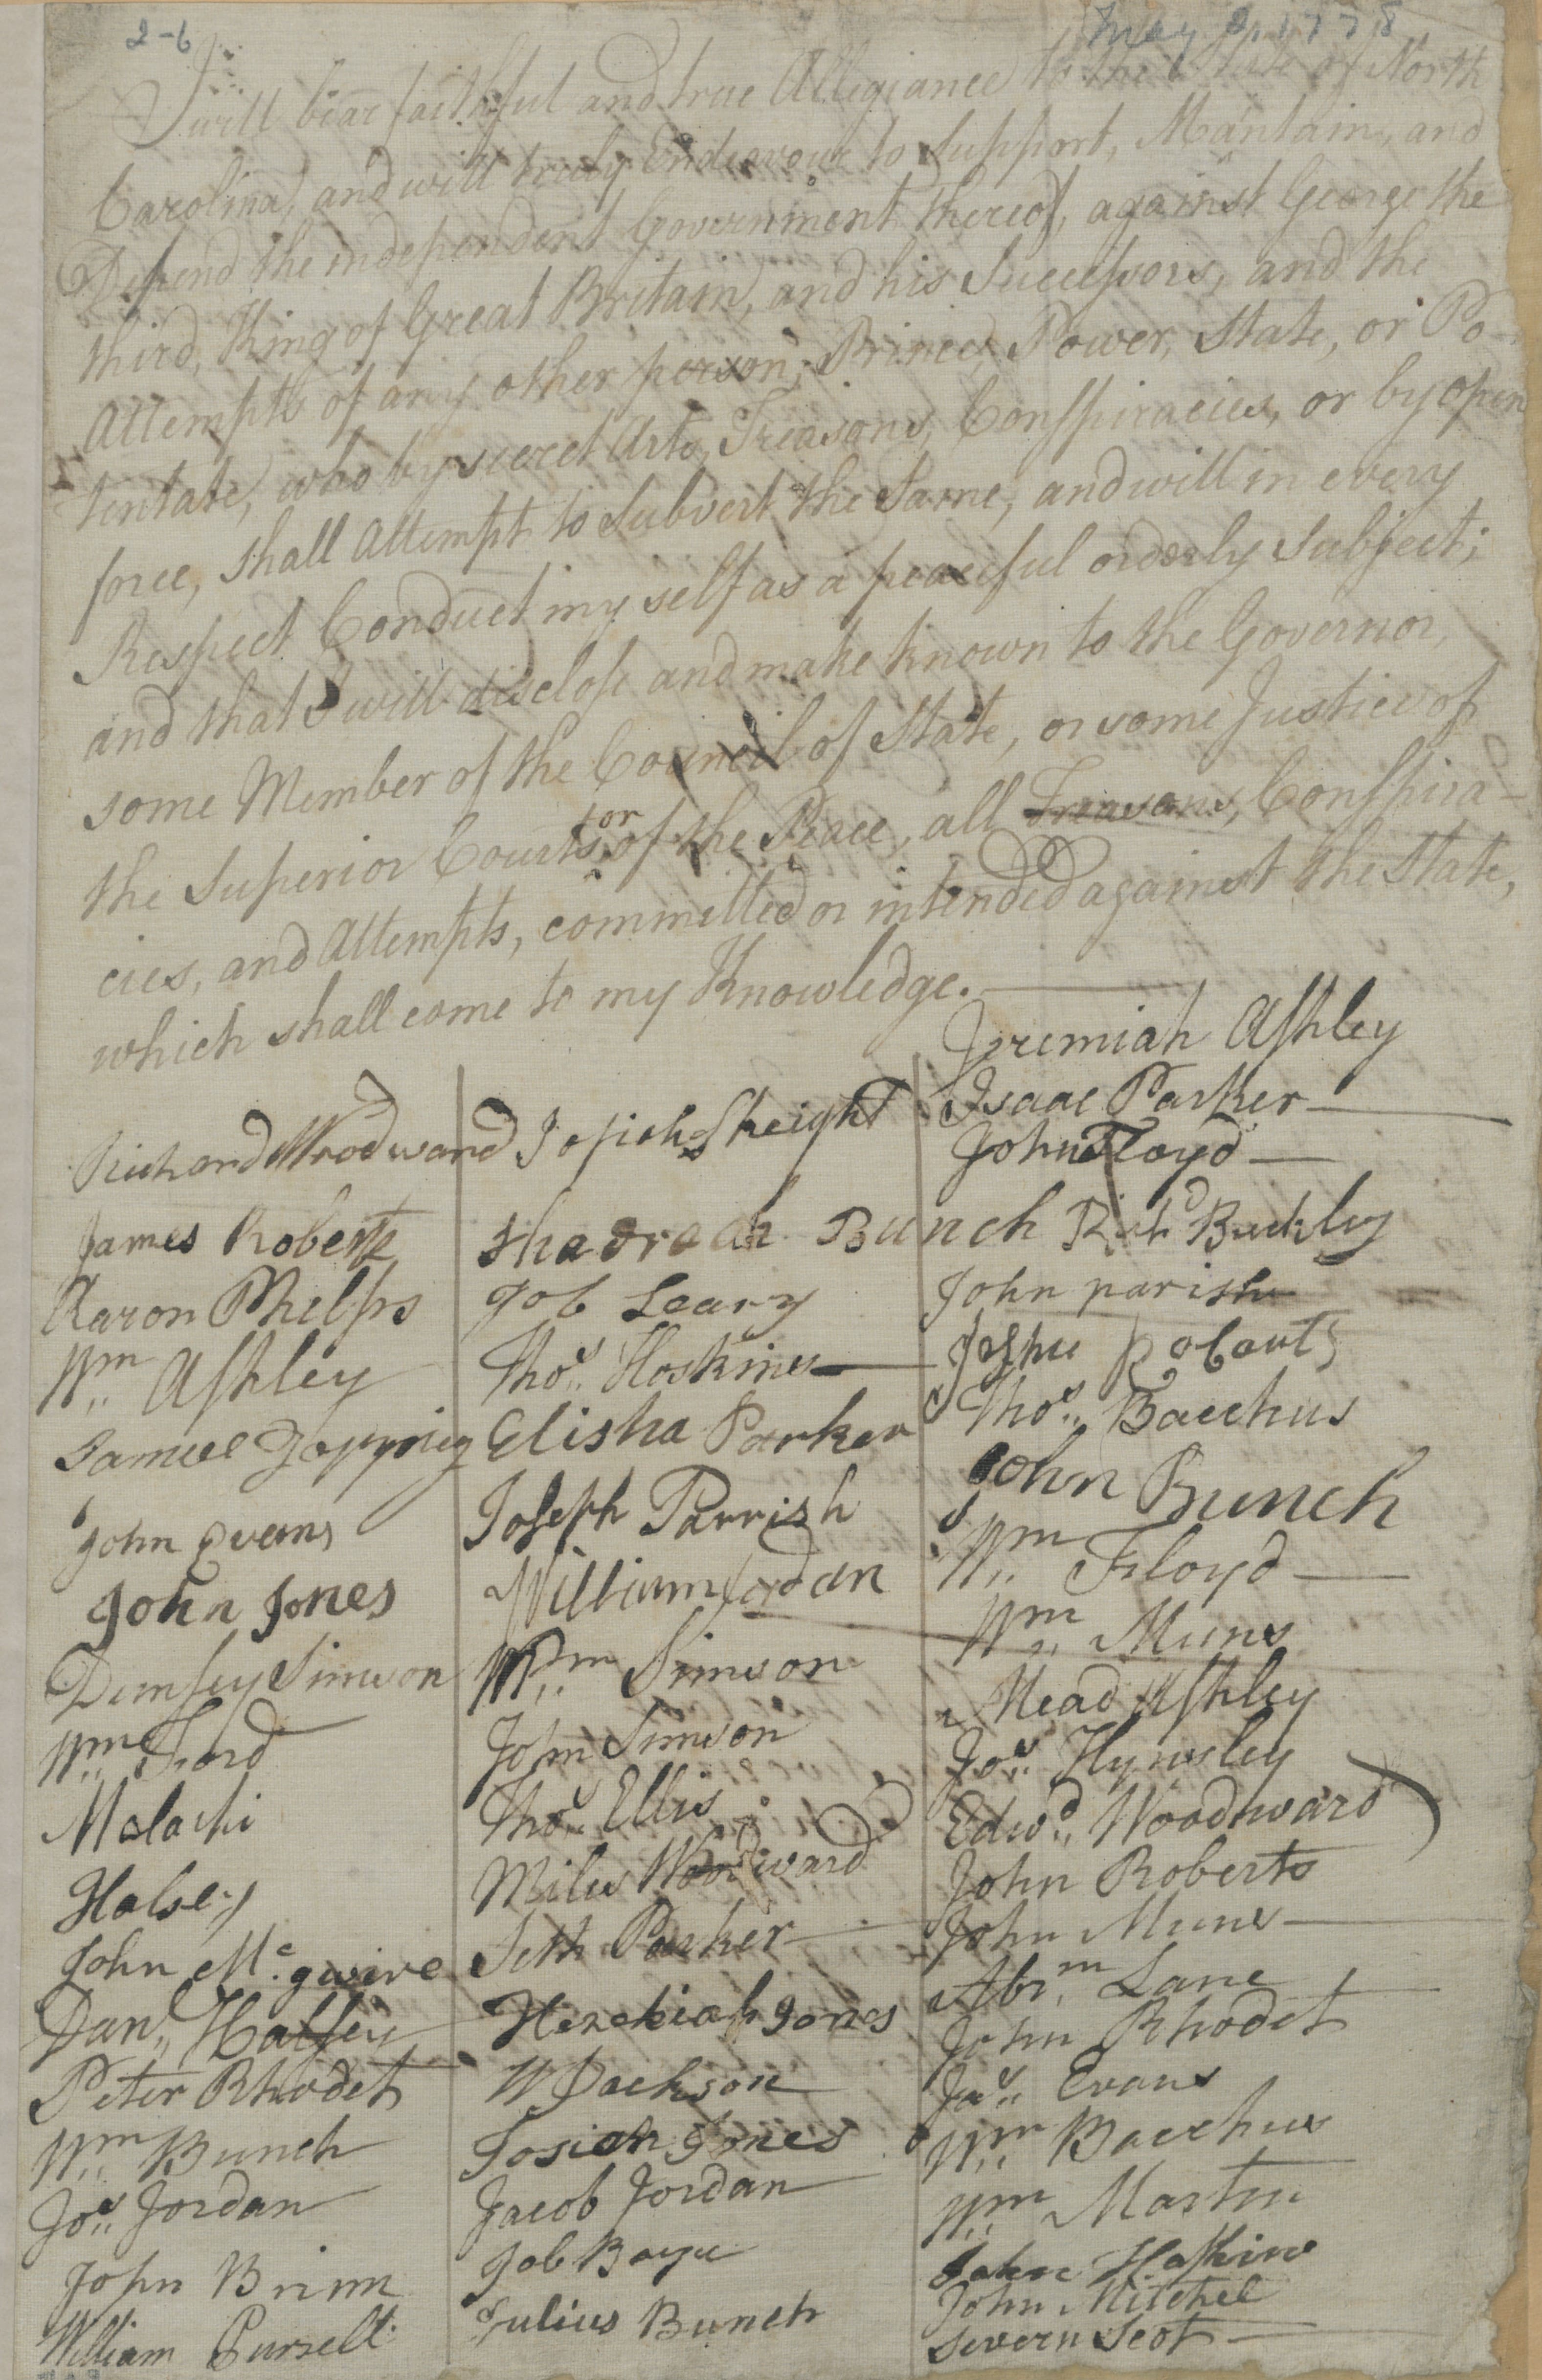 List of People Swearing and Refusing the Oath of Allegiance in Chowan County, 2 May 1778, page 1